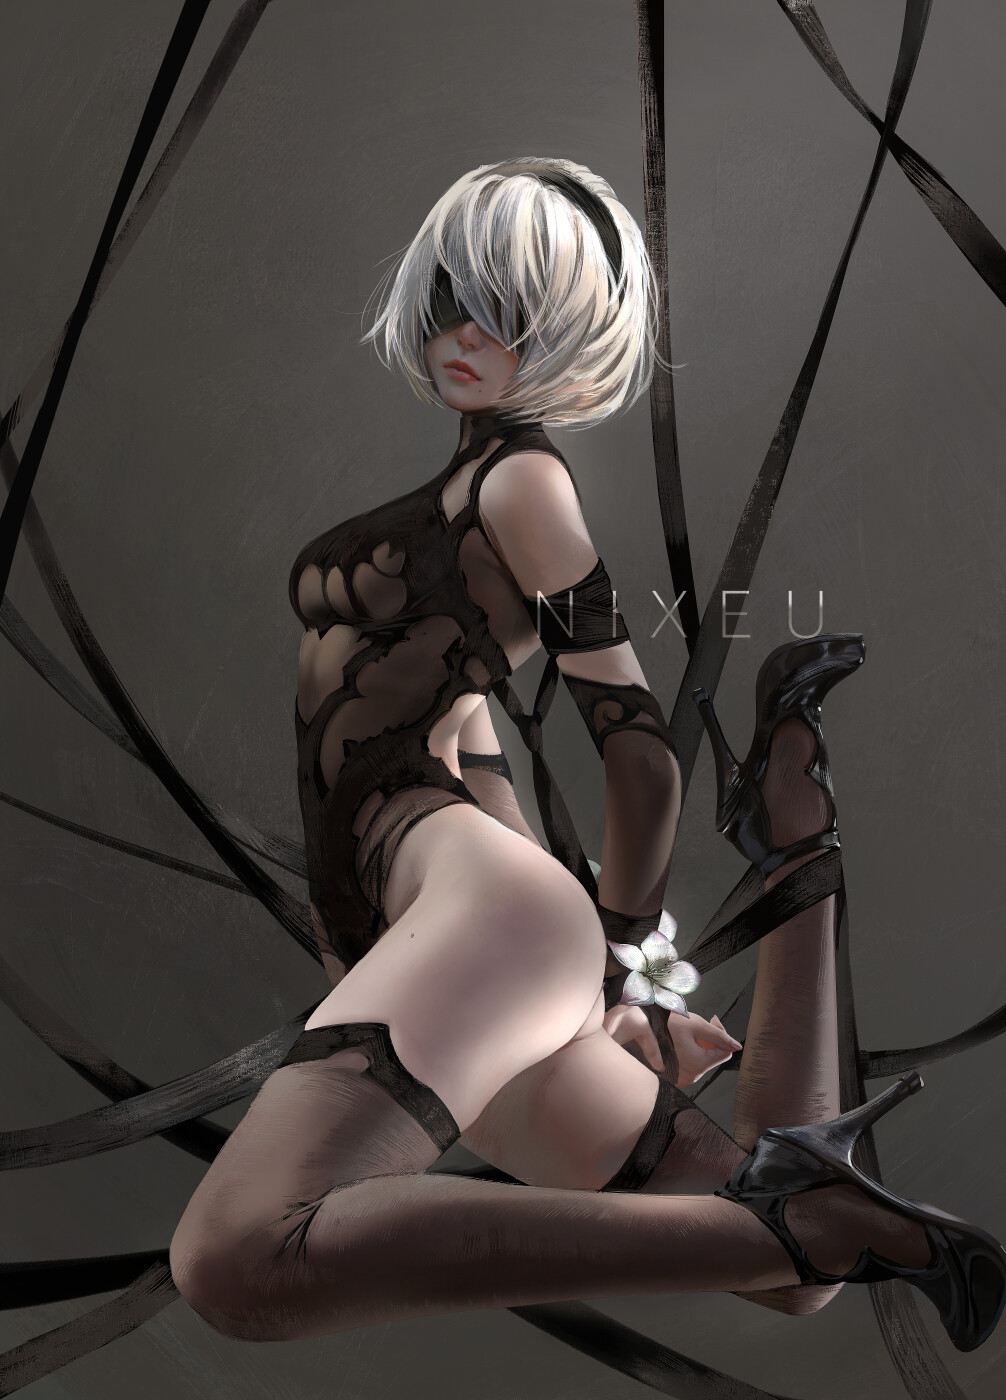 2B from NieR: Automata